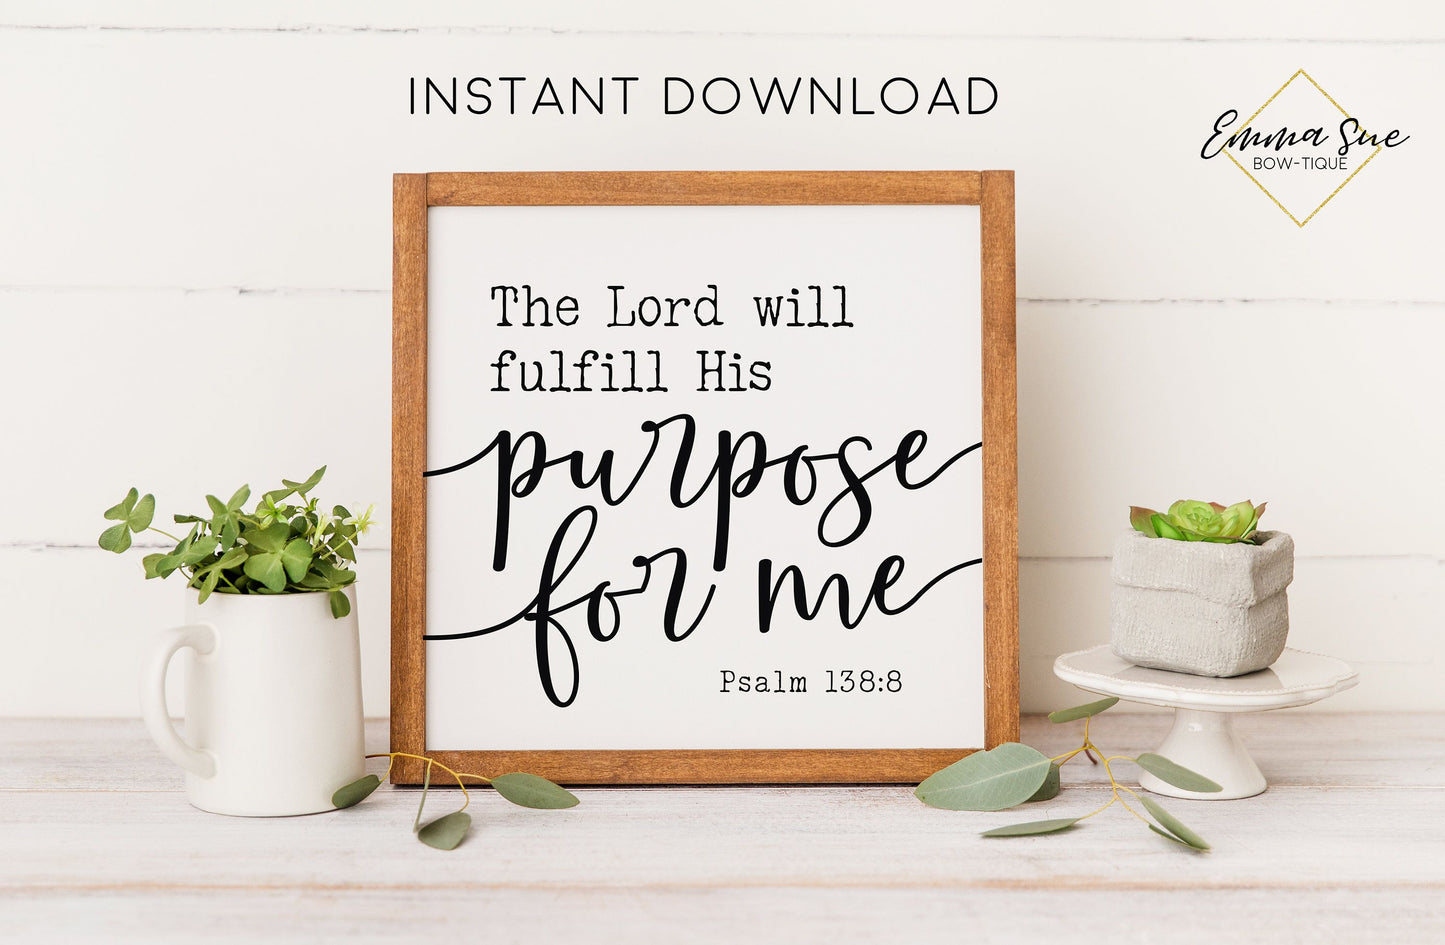 The Lord will fulfill His purpose for me Psalm 138:8 Bible Verse - God's Plan Printable Art Sign Digital File